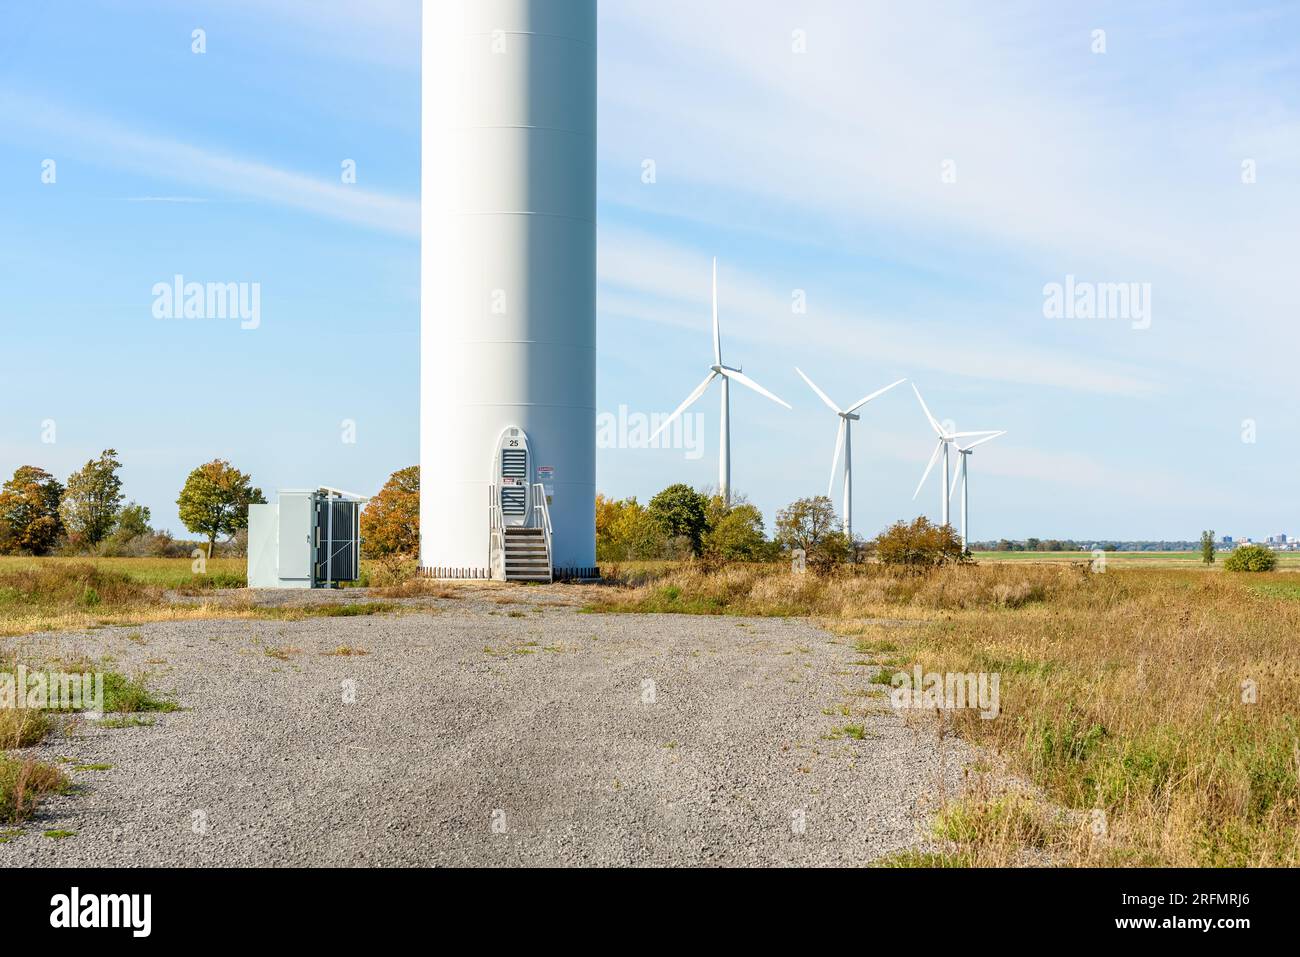 Door at the base of a tower supporting a wind turbine in the countryside on a sunny autumn day. Other wind turbines are visible in background. Stock Photo